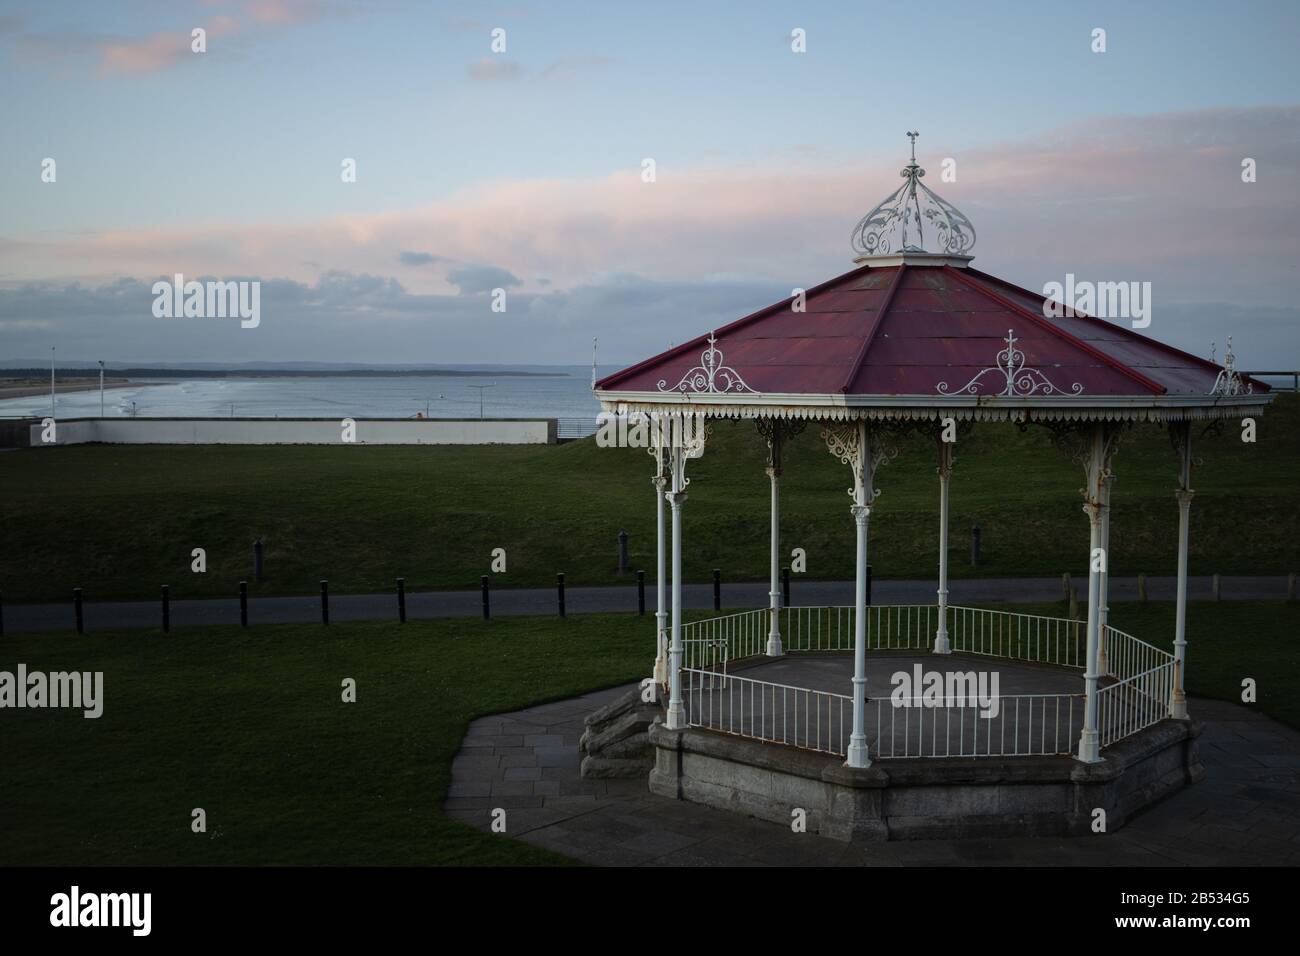 ST ANDREWS, SCOTLAND - 2/3/2020 - A view of the bandstand behind the Old Course, with the sea off West Sands in the background, at dusk Stock Photo